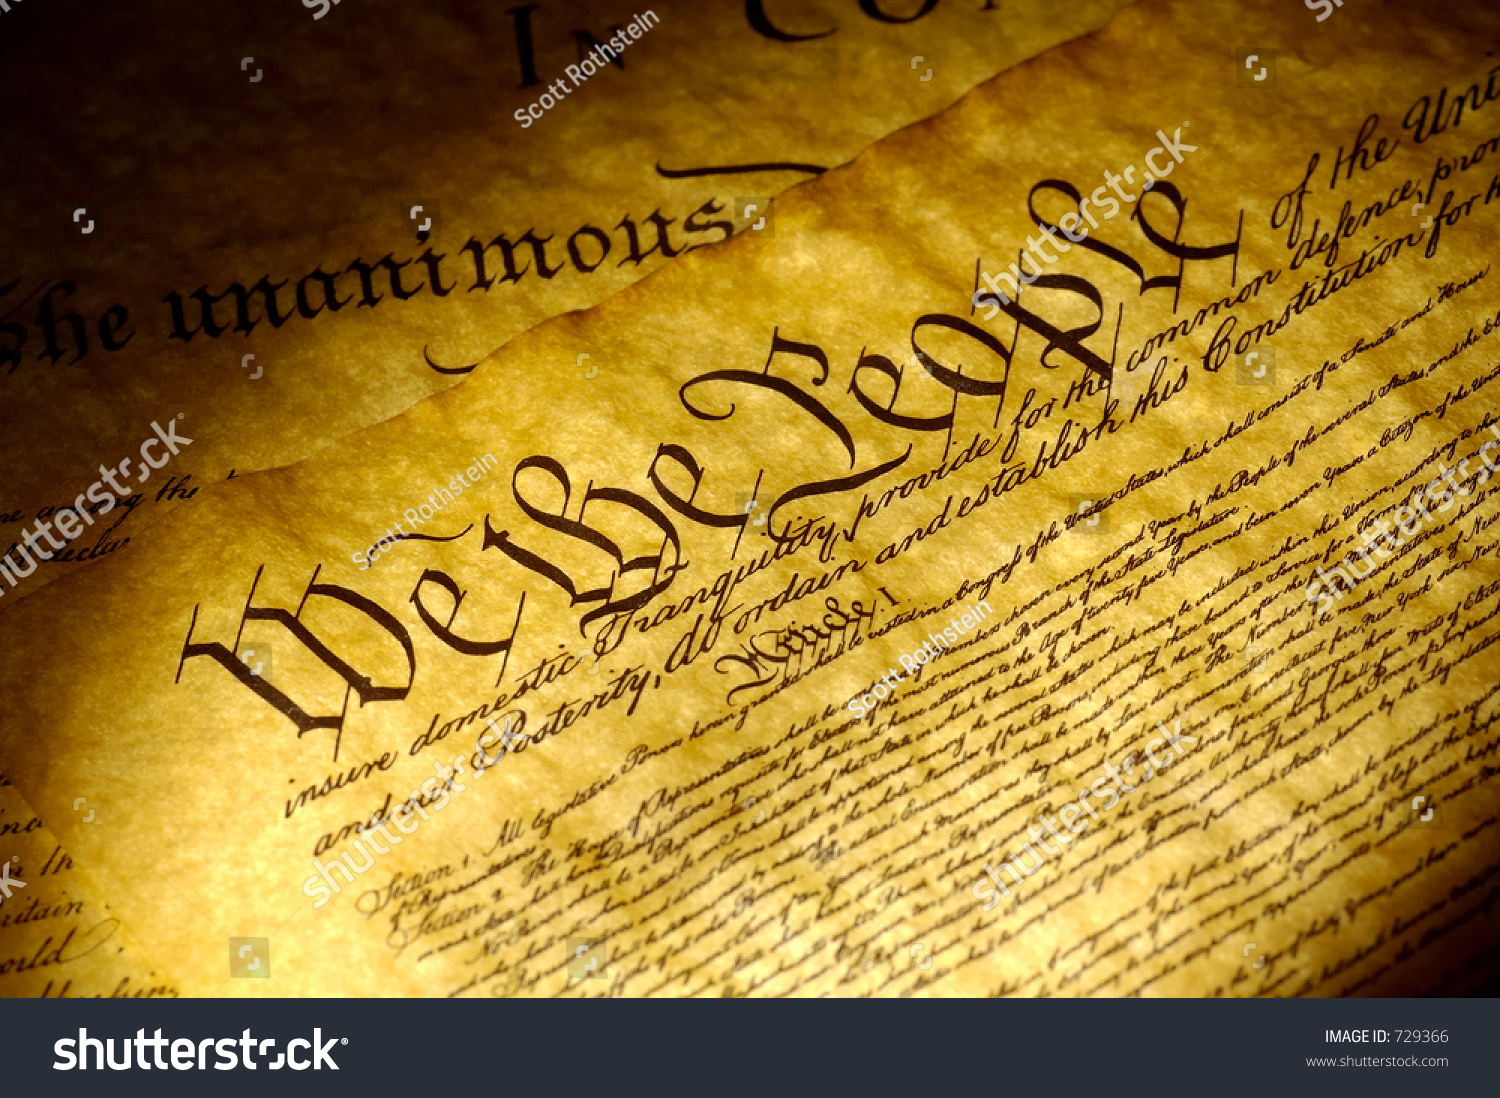 Spot Light On The Declaration Of Independence Stock Photo